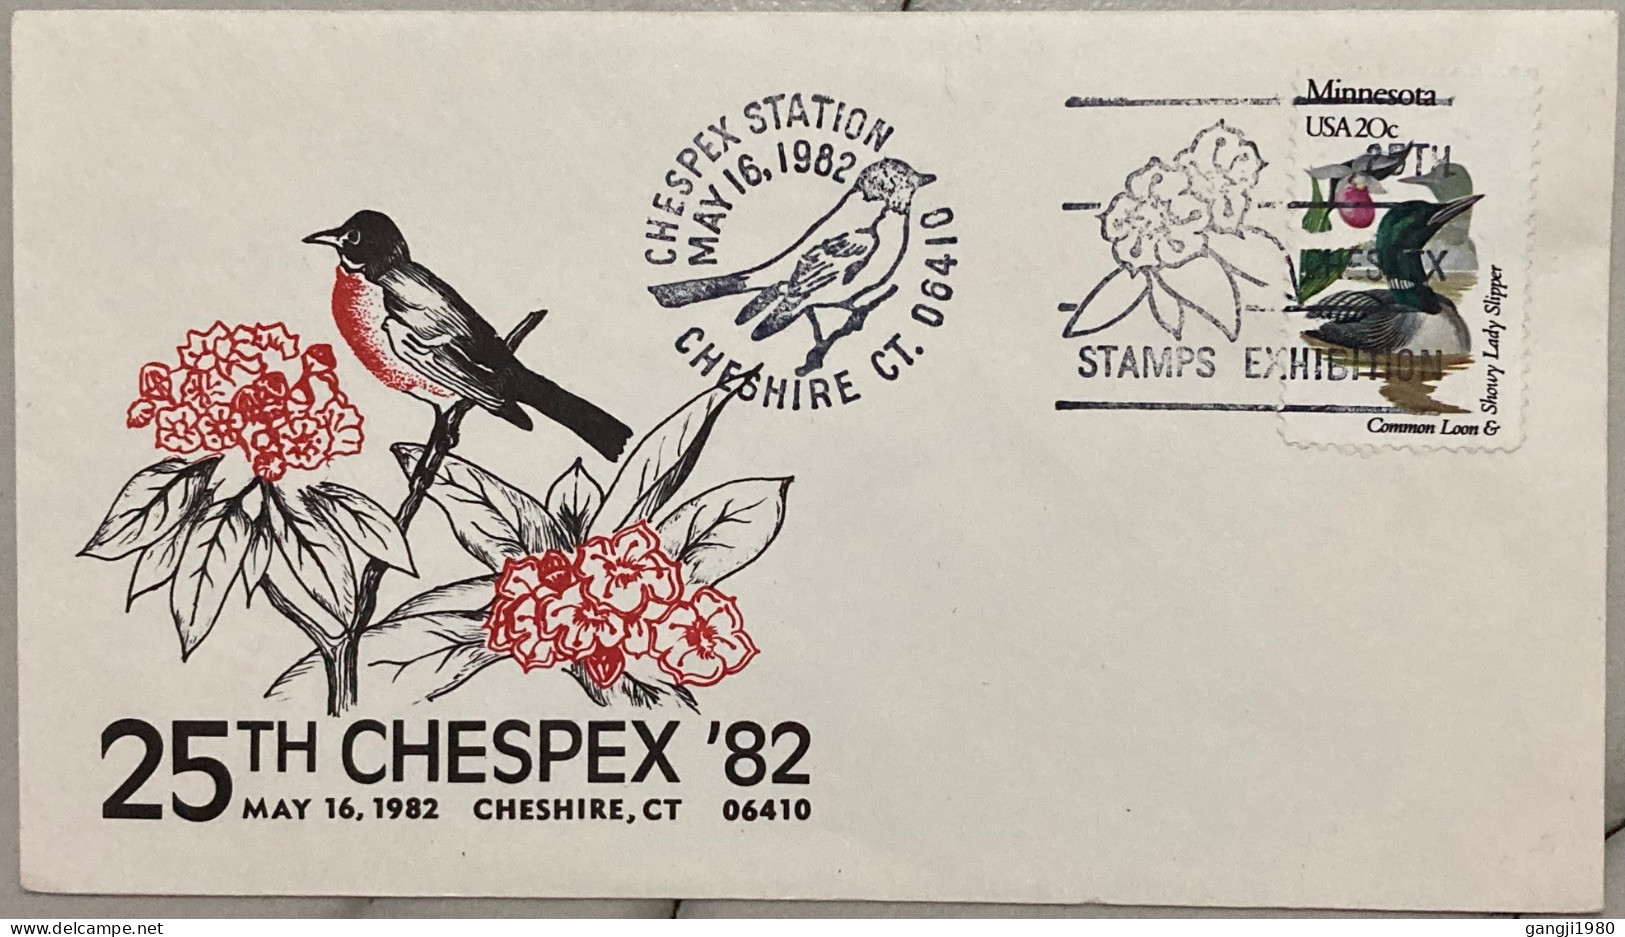 USA 1982, SPECIAL ILLUSTRATED, BIRD COVER, CHESPEX 1982, CHESHIRE CITY. FLOWER PLANT & BIRD PICTURE CANCEL - Afstempelingen & Vlagstempels